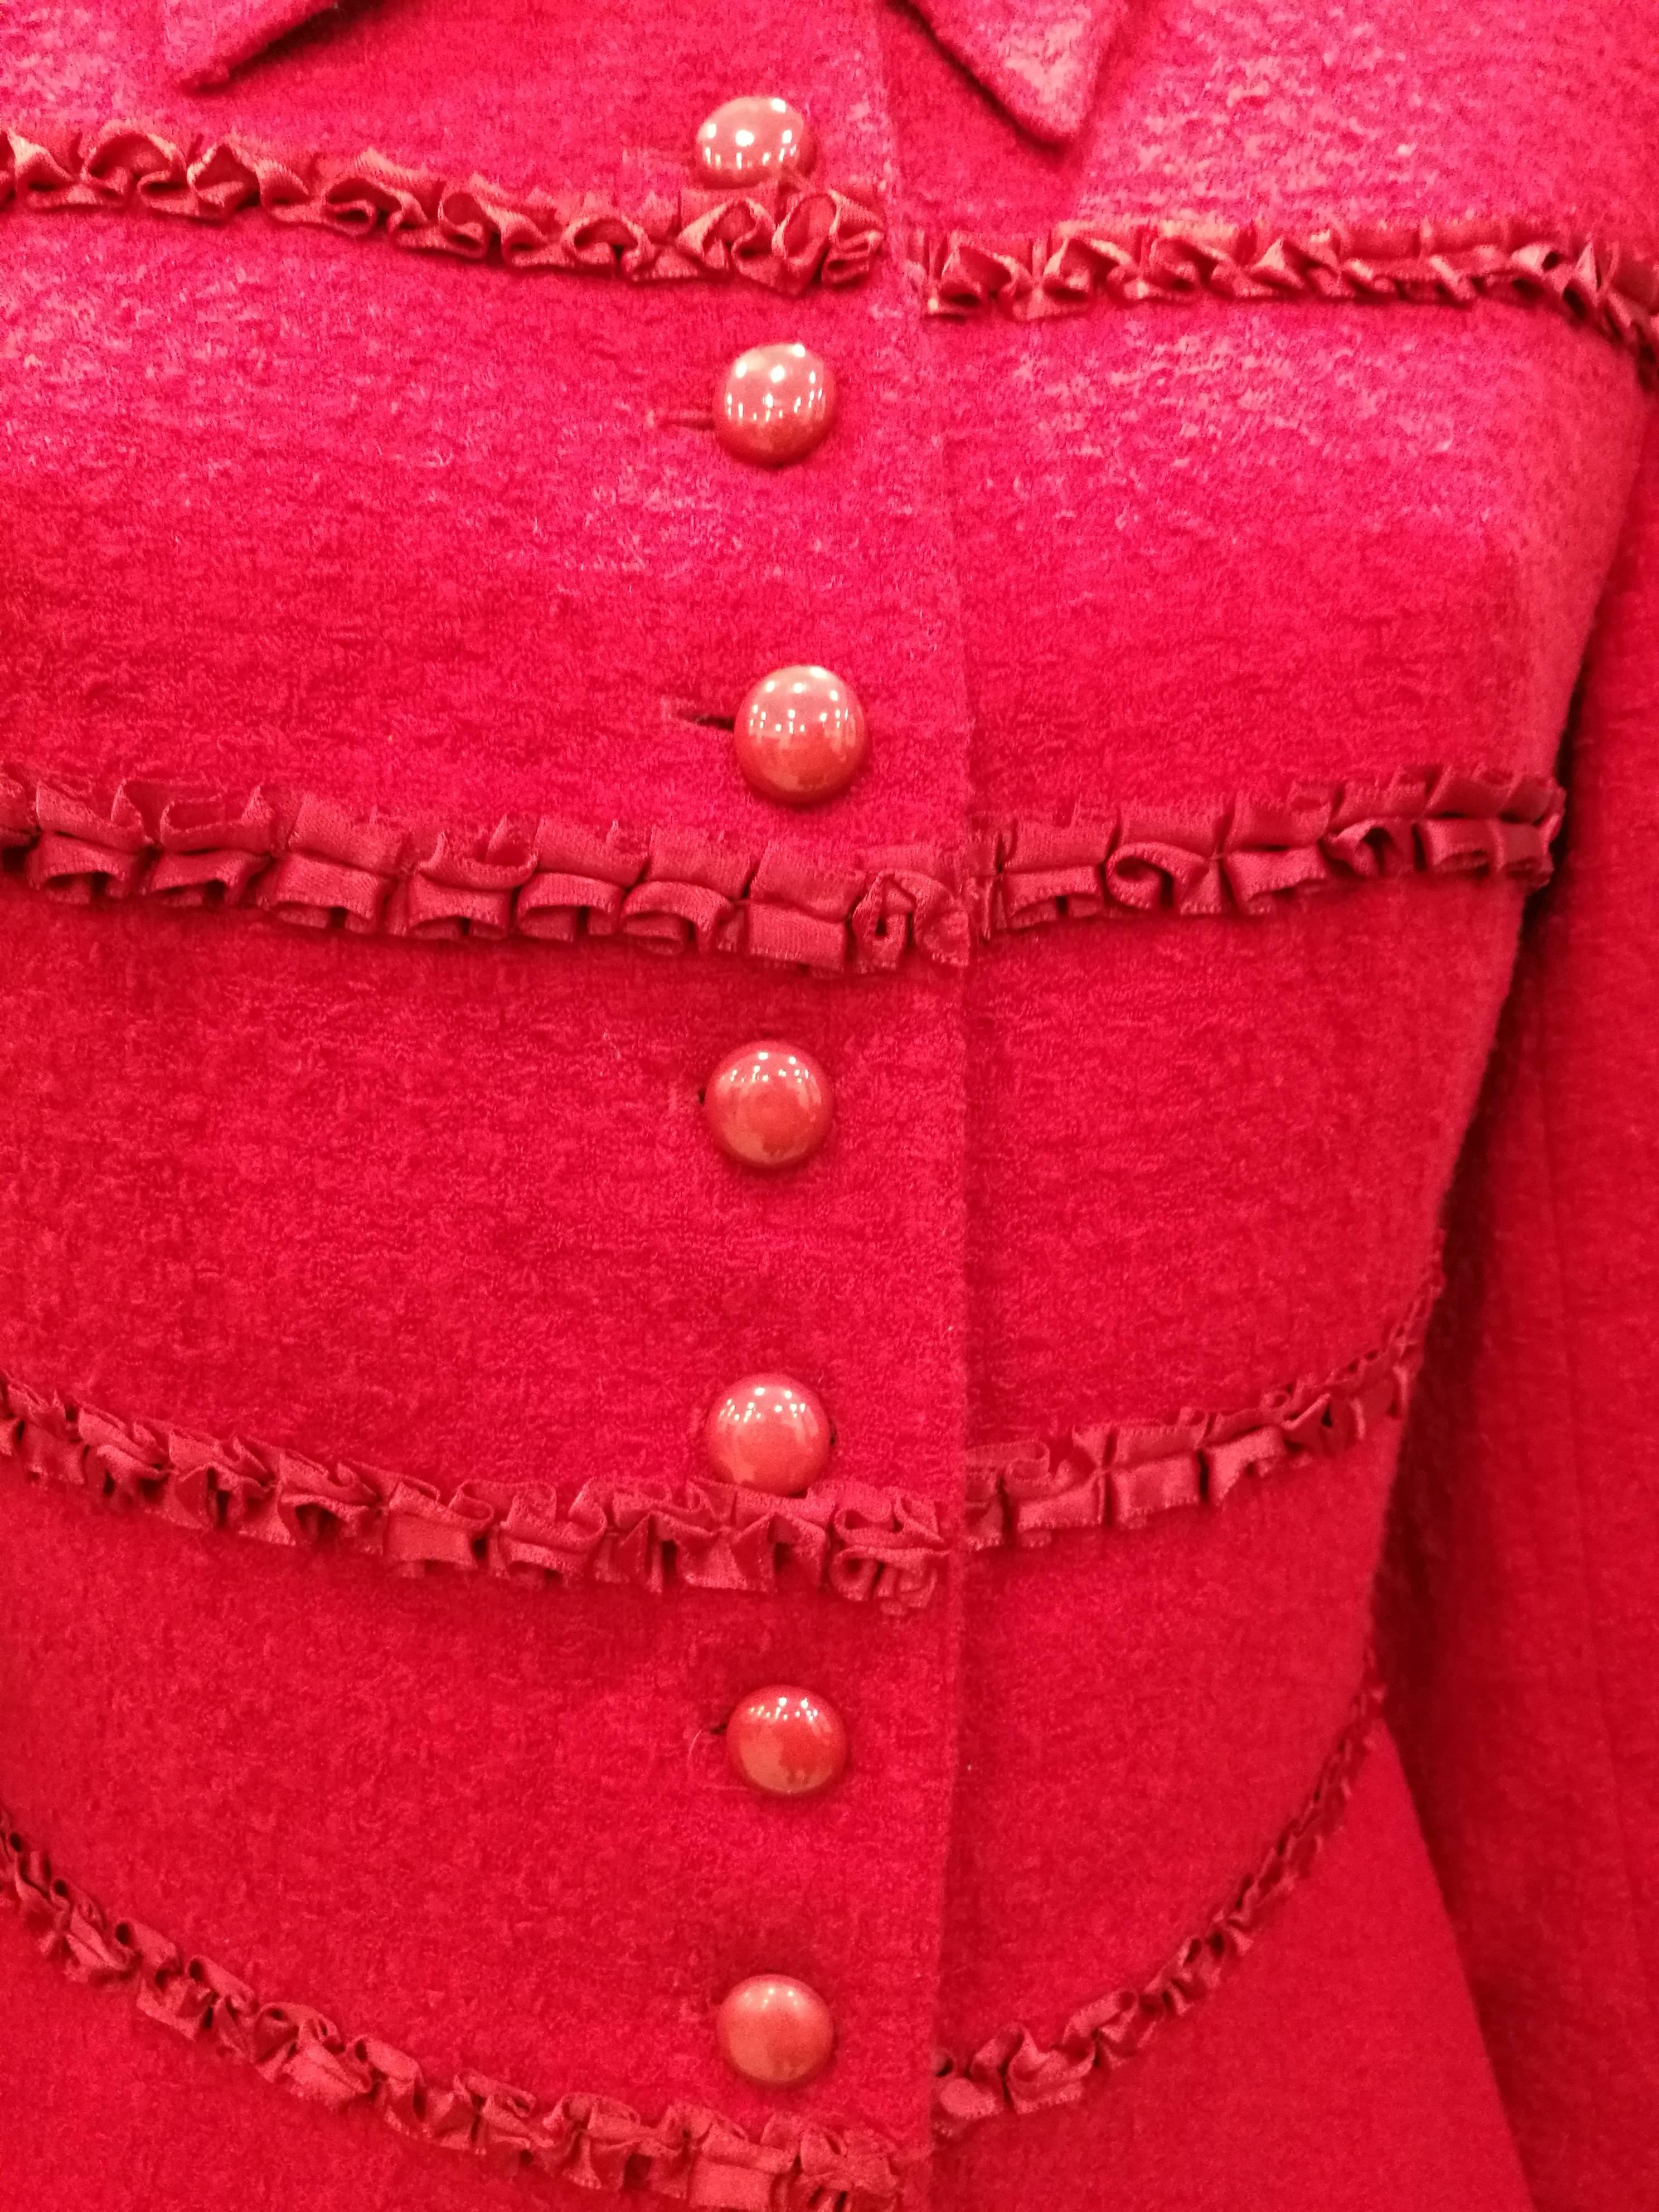 1980s Valentino Miss V. Red Wool Jacket

Totally made in italy in italian size range 44

Composition:89 Wool and 11 polyamide